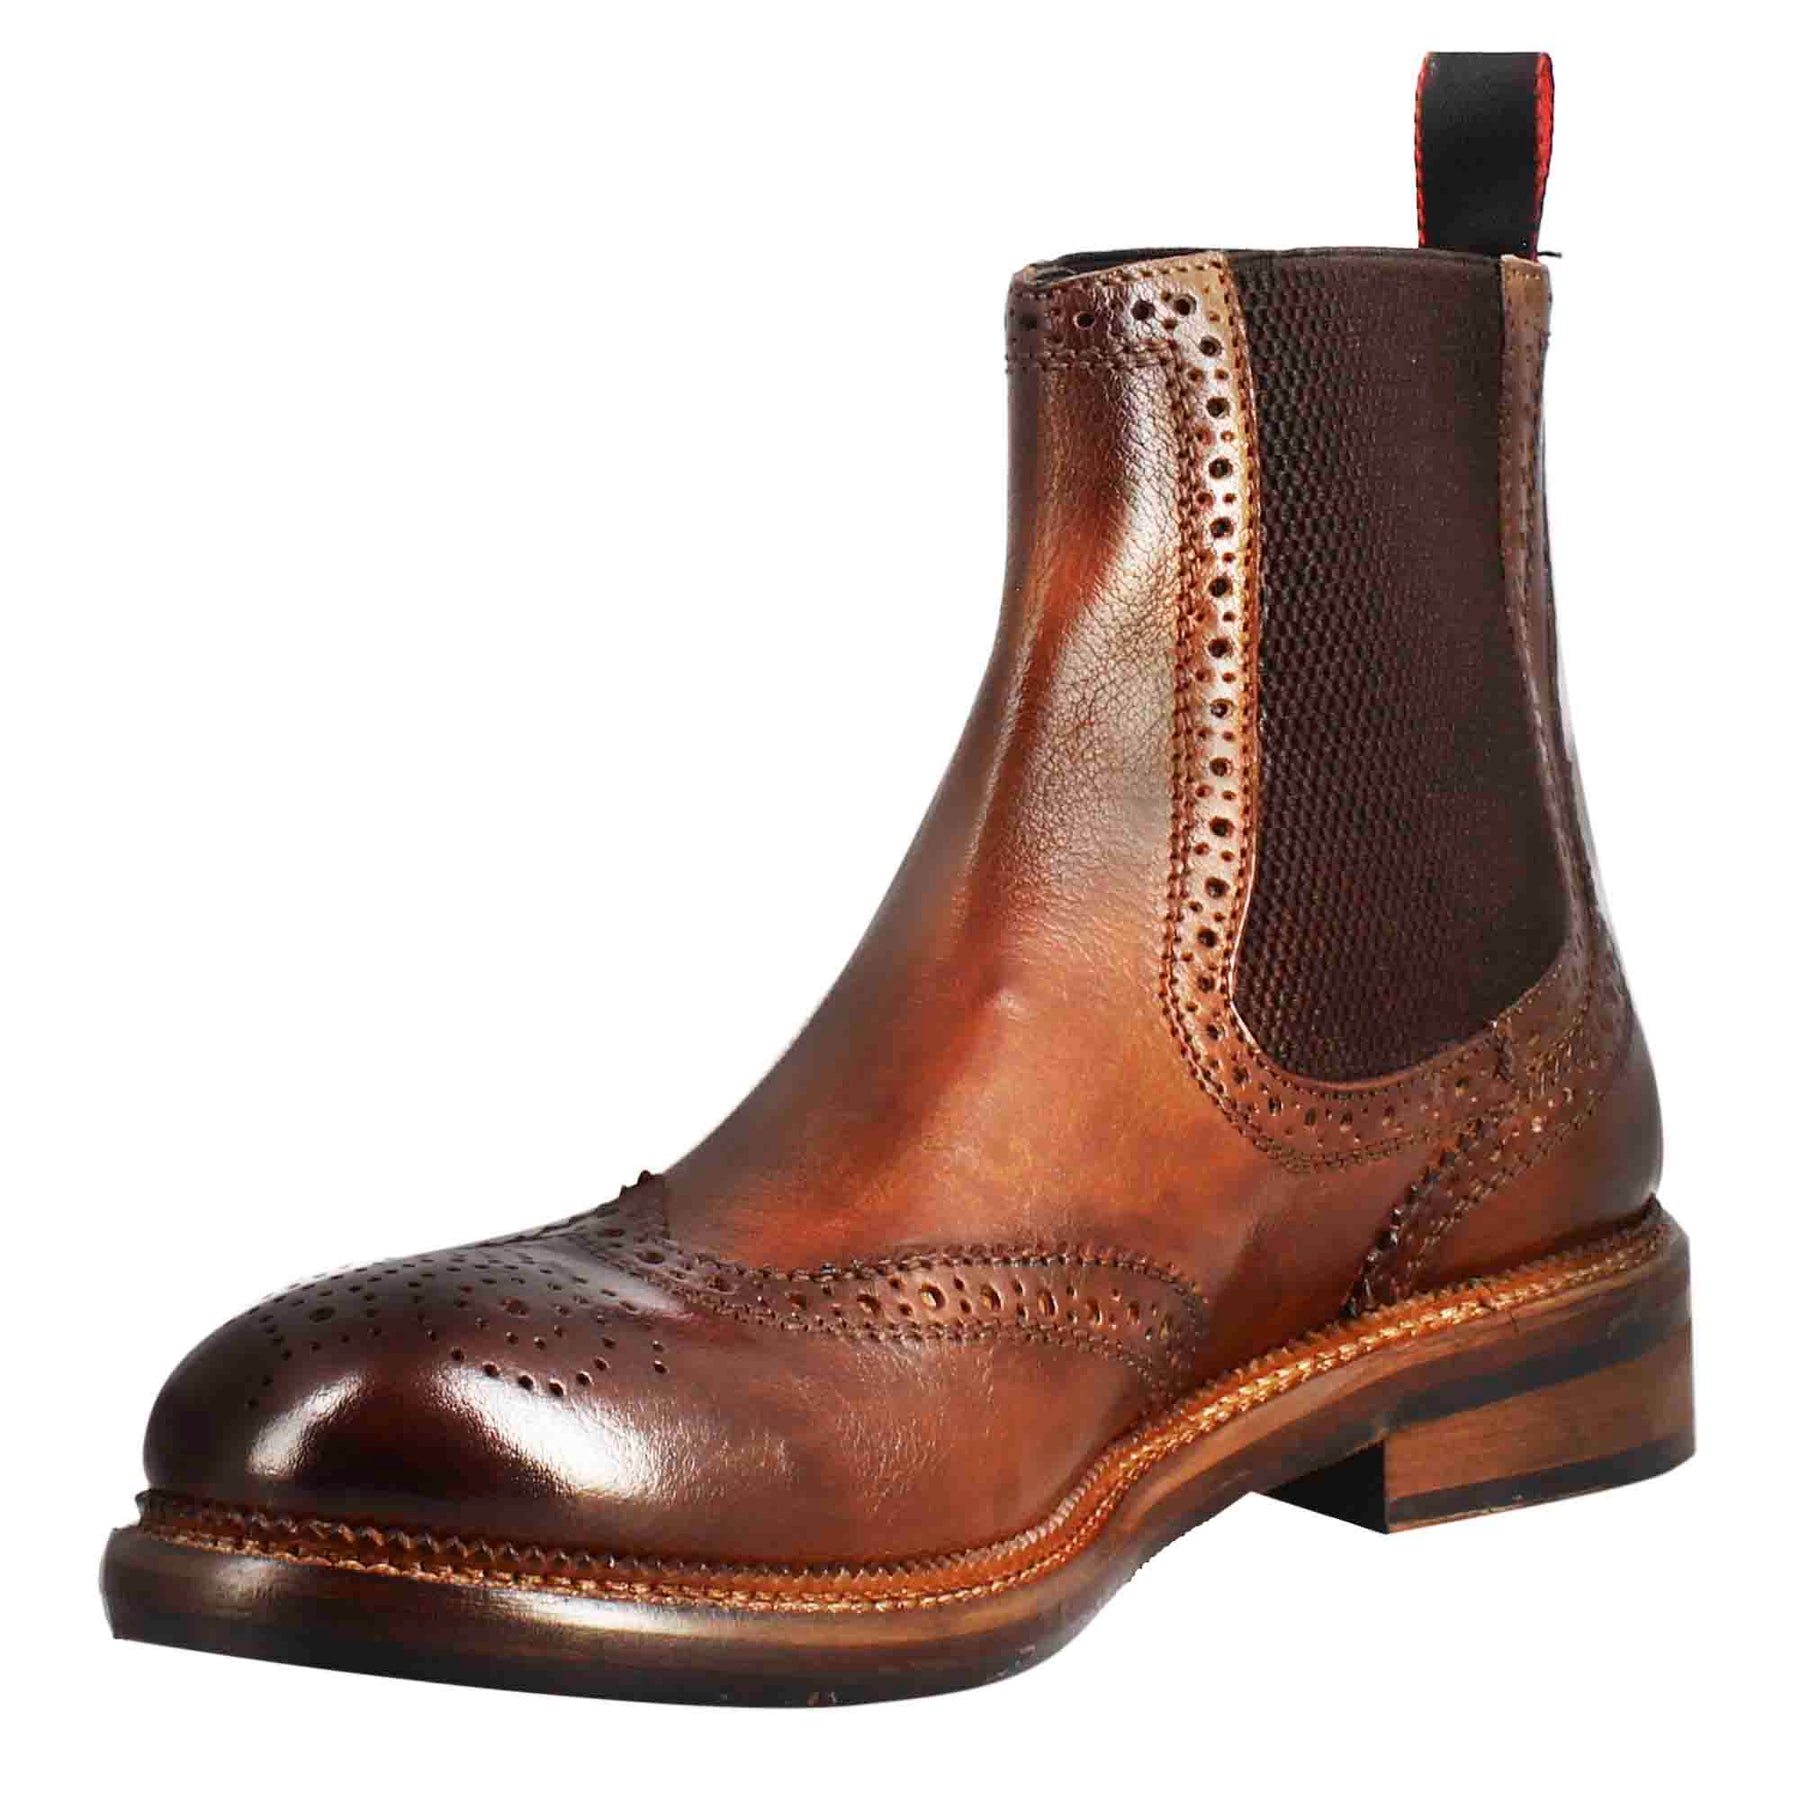 Men's candy chelsea boot in washed leather, dark tan color